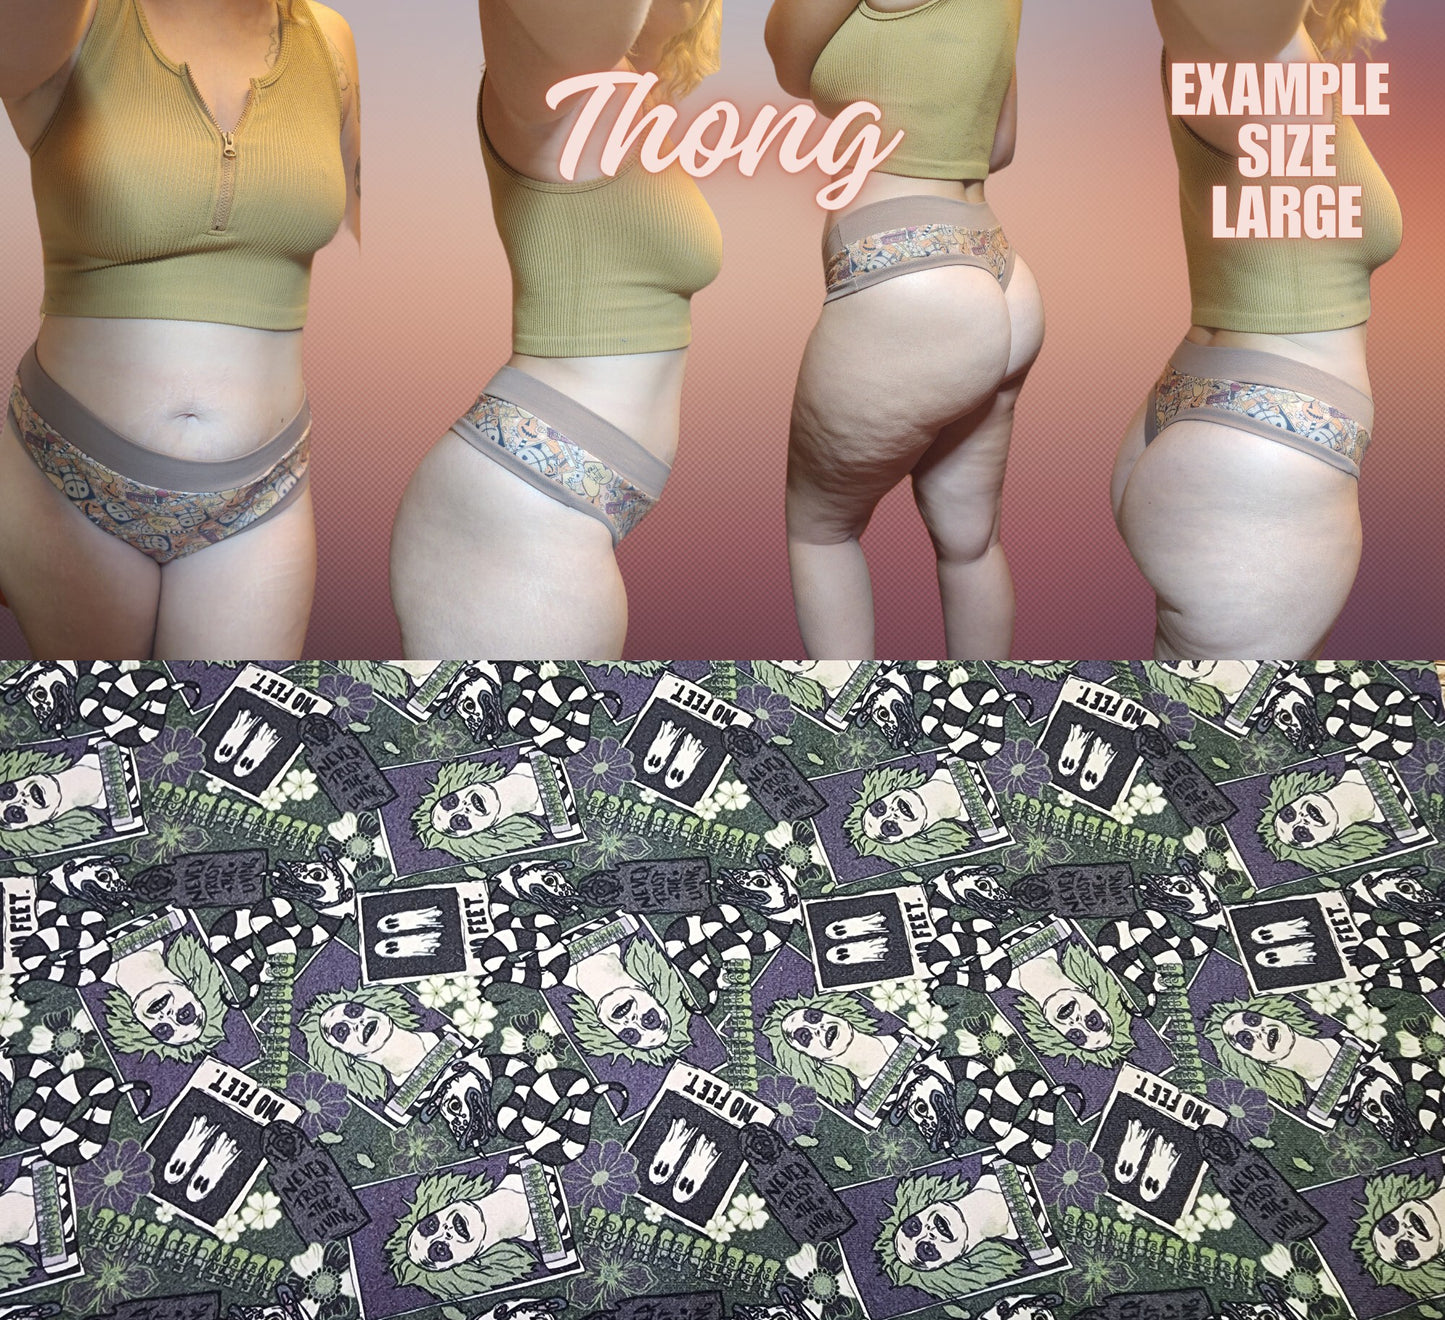 Muted Horror x6 Prints | Thondlewear, Thongs for every body | Elastic or Knit Bands